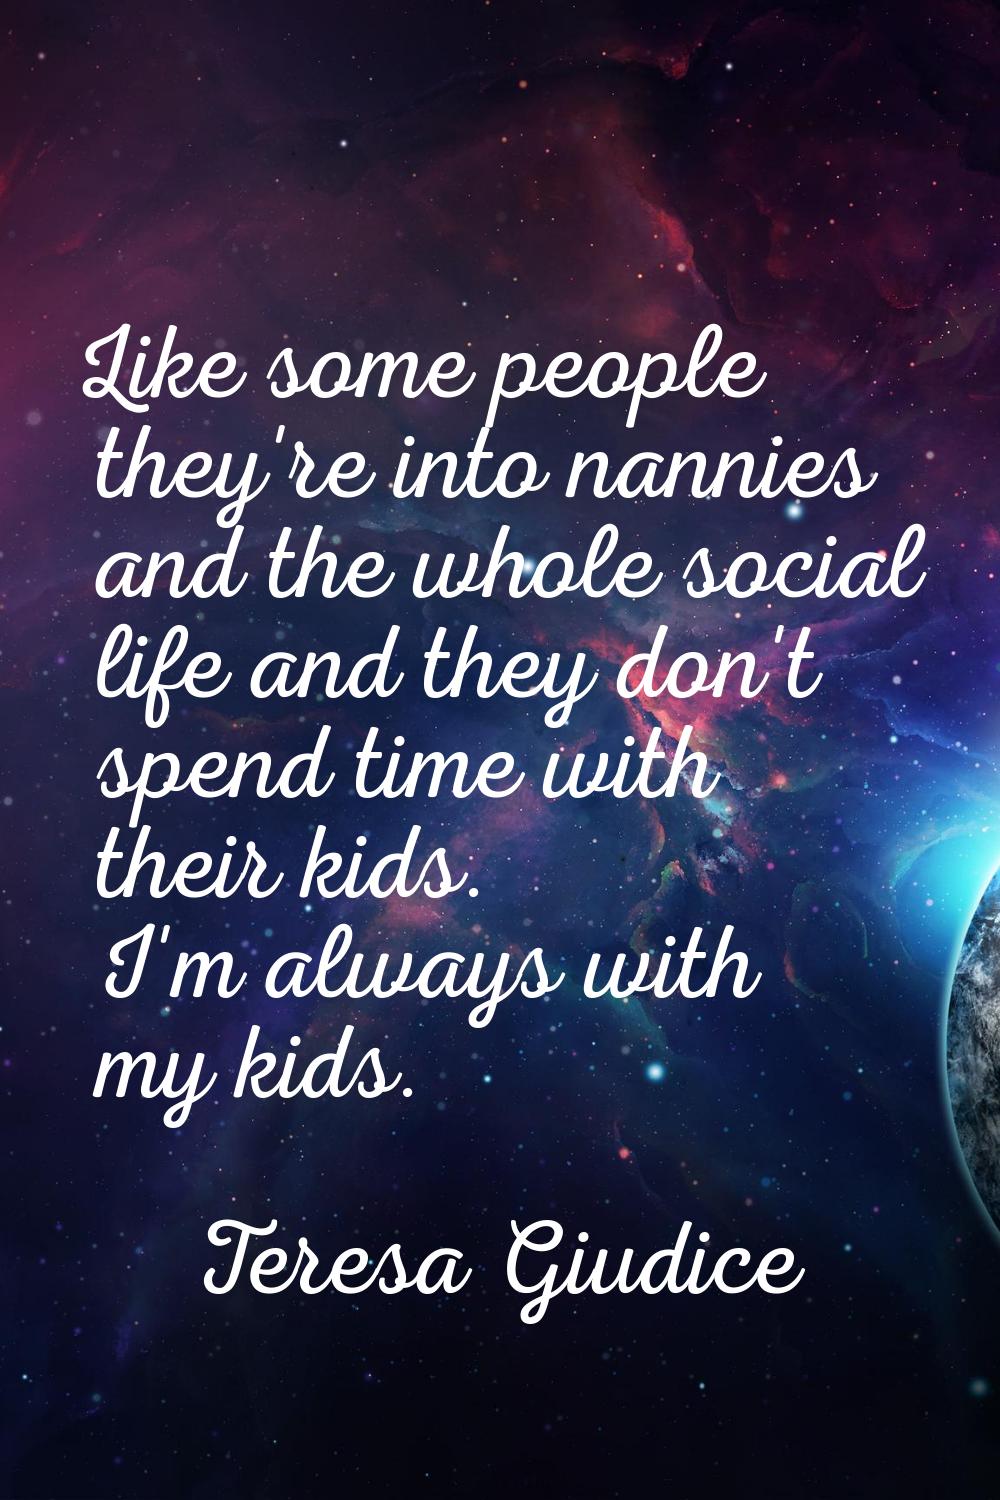 Like some people they're into nannies and the whole social life and they don't spend time with thei